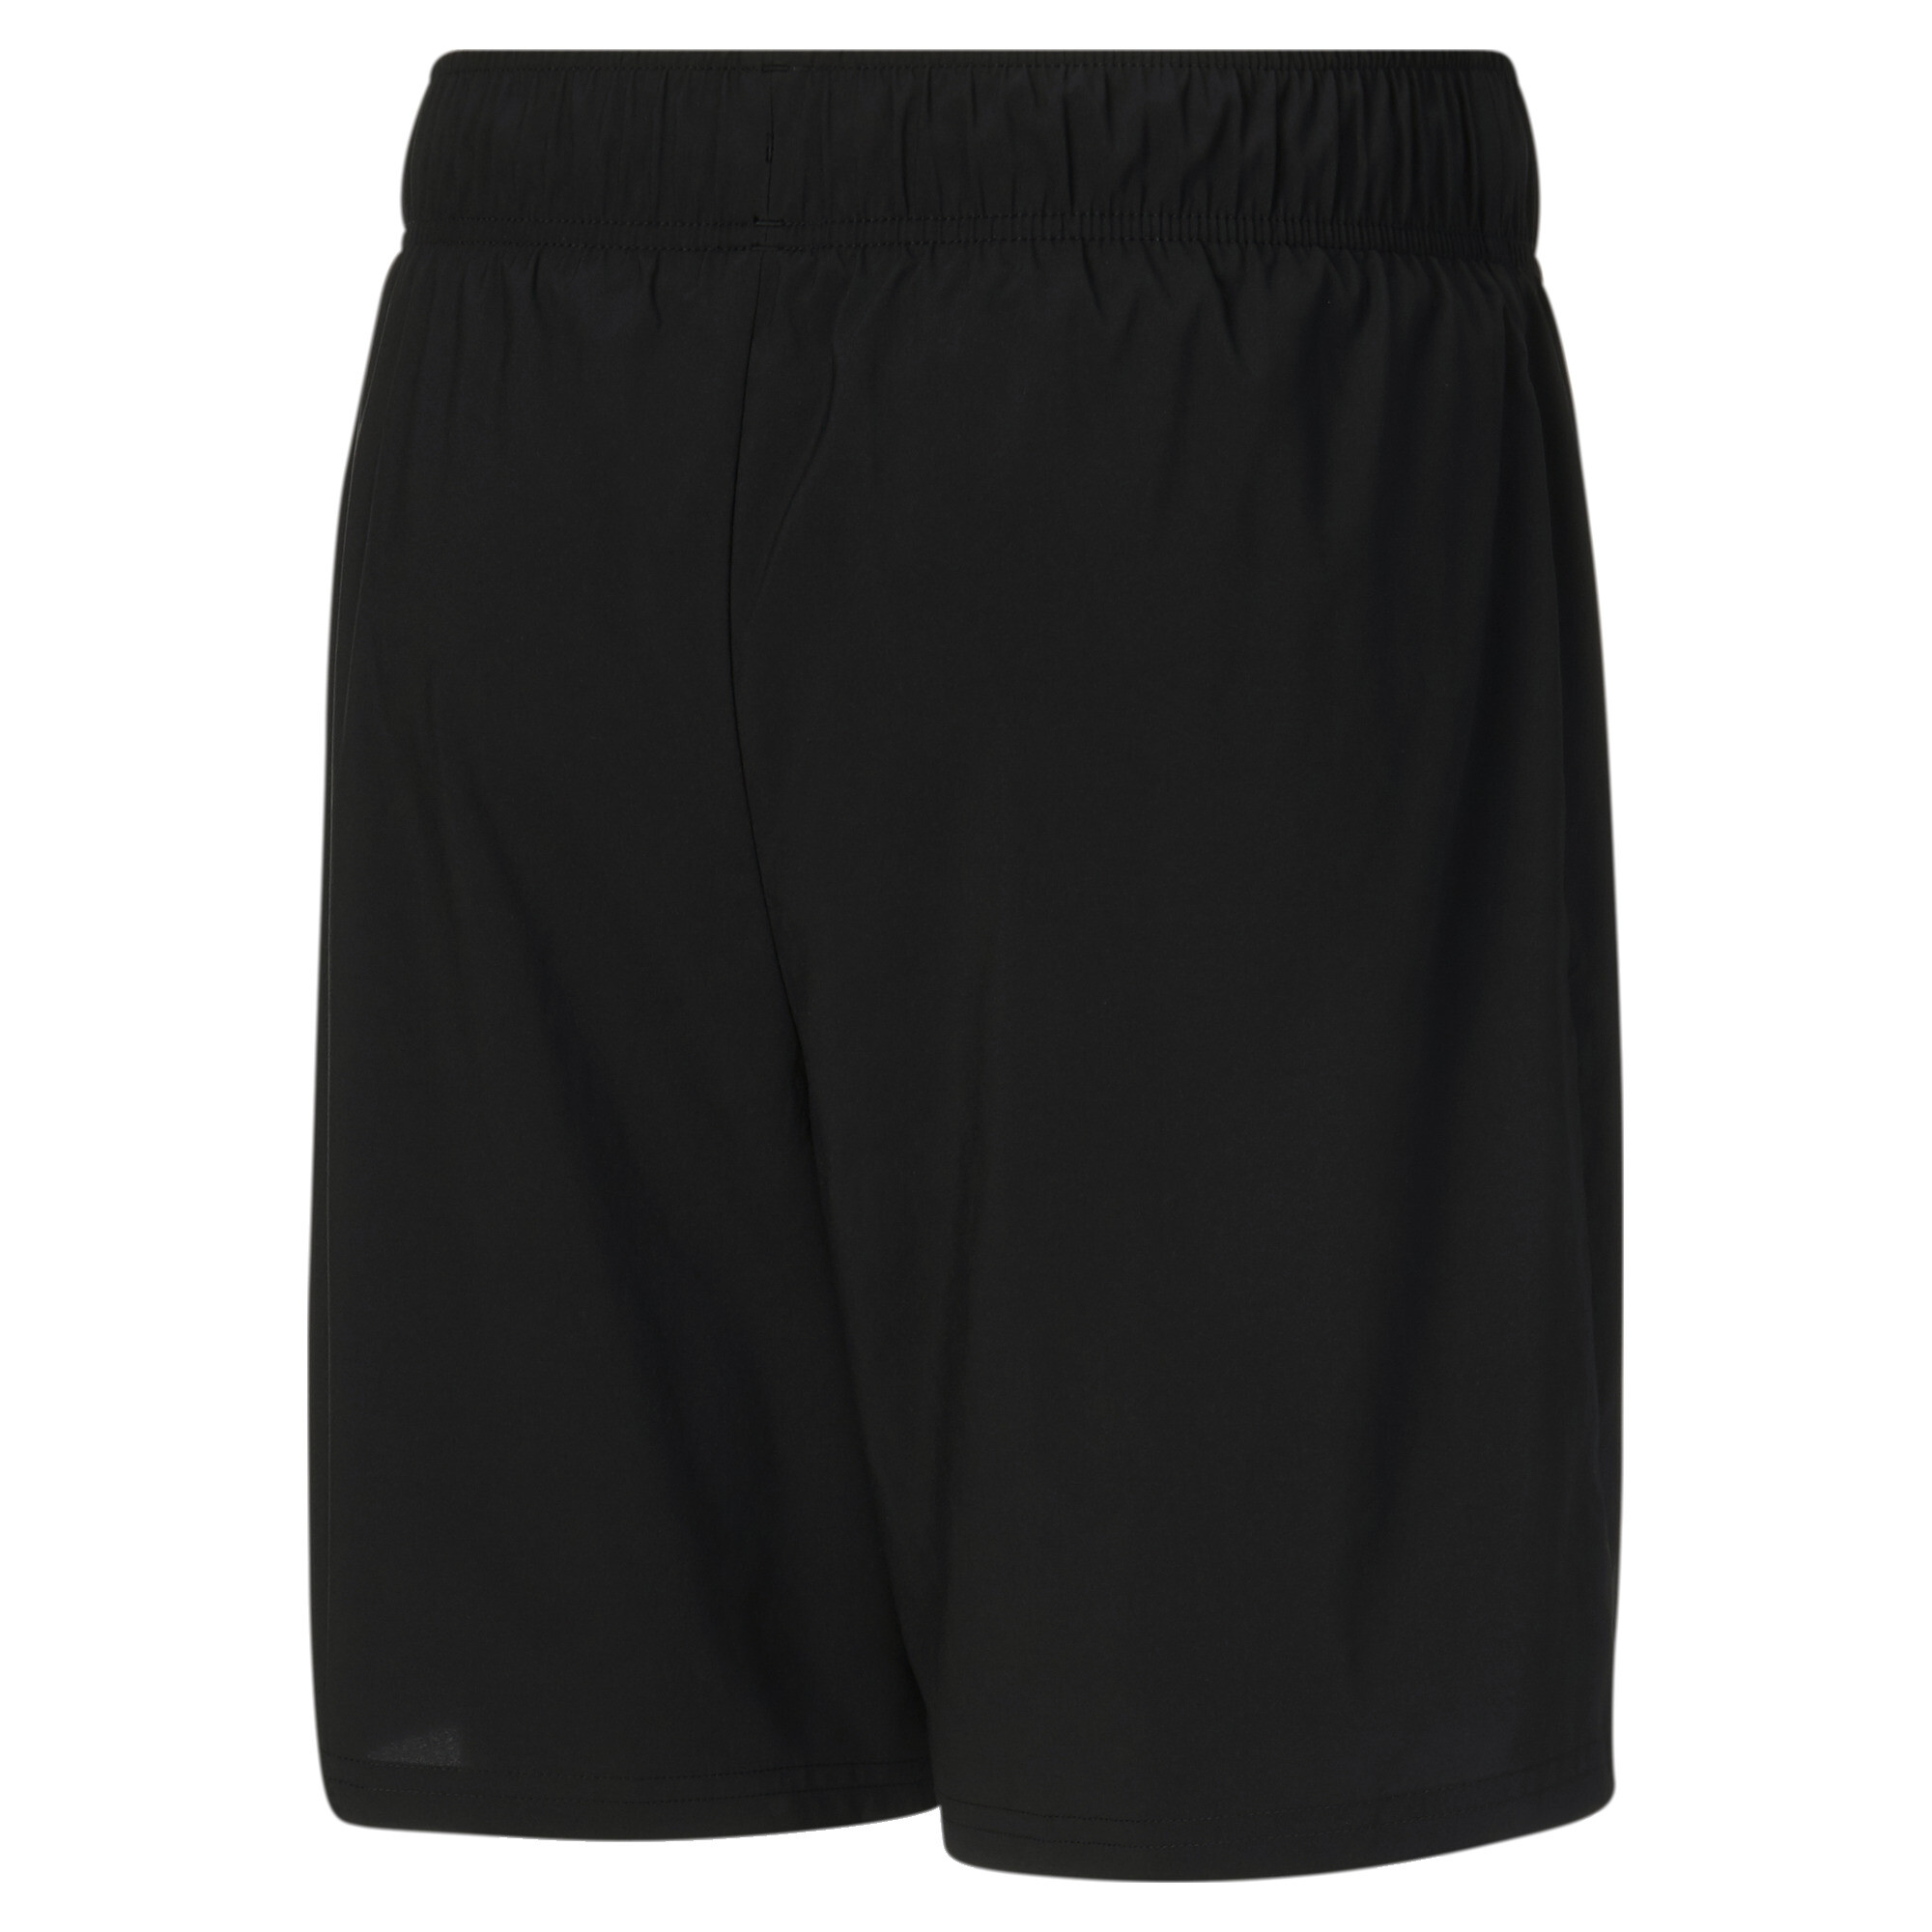 Men's Puma Favourite 2-in-1's Running Shorts, Black, Size L, Clothing